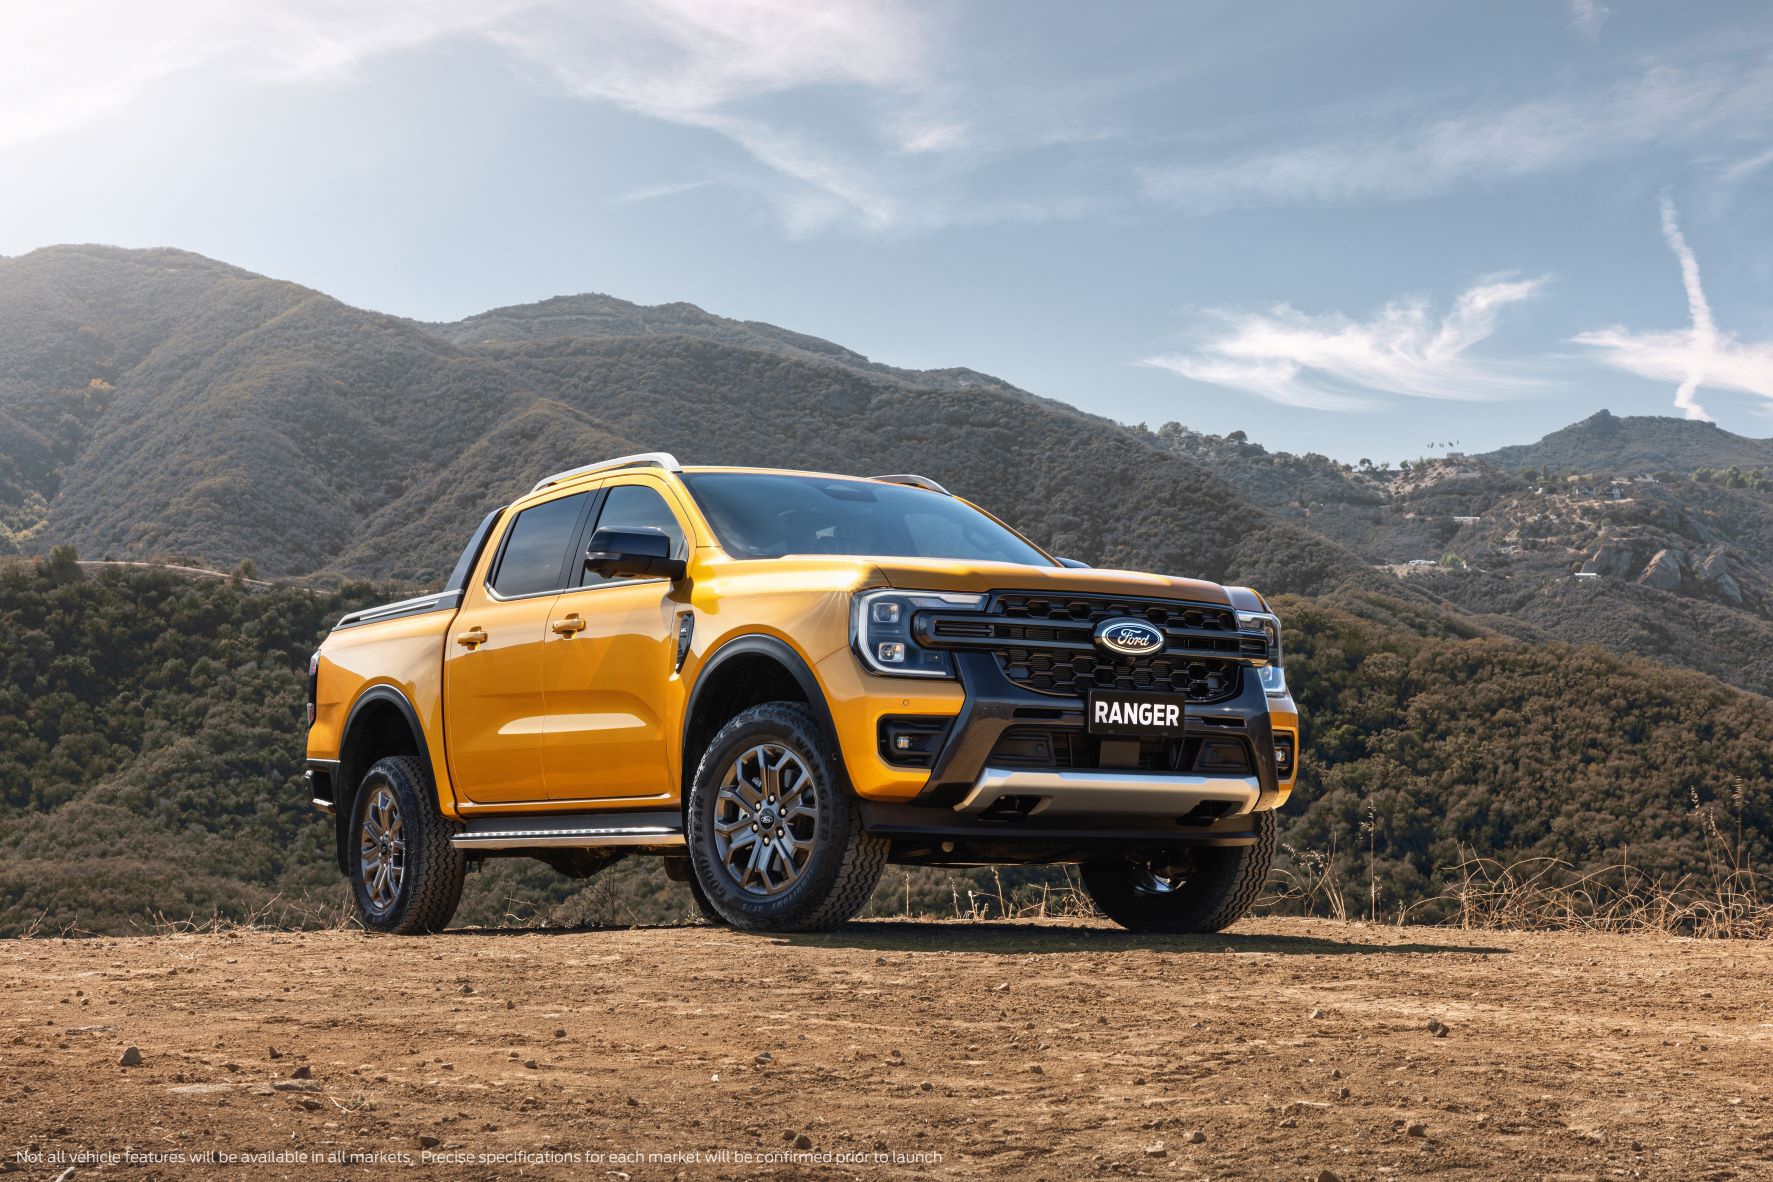 https://www.motorbiscuit.com/wp-content/uploads/2021/11/Orange-2023-Ford-Ranger-with-mountains-in-the-background.jpg